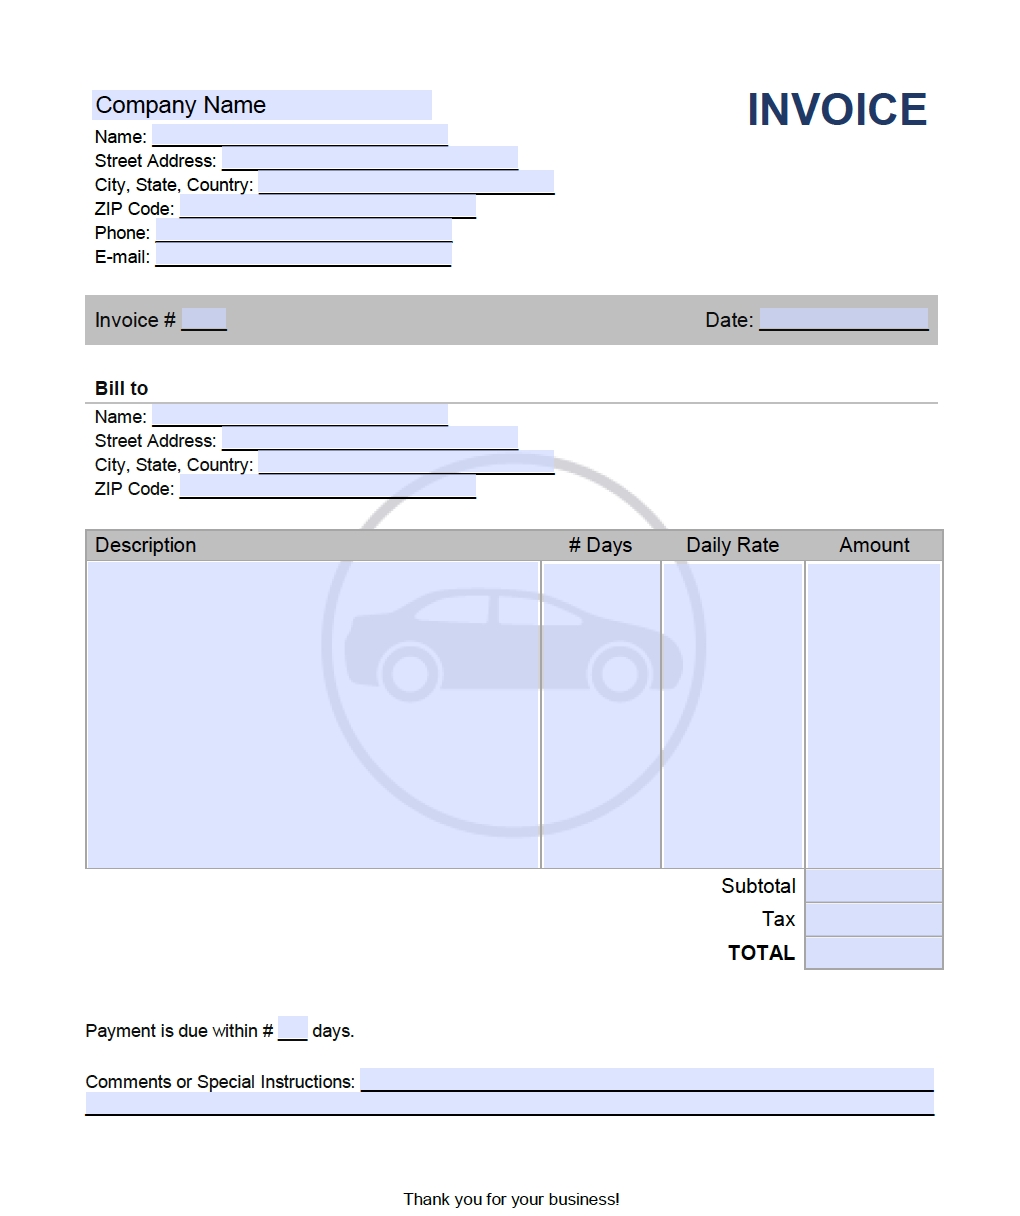 car rental invoice template onlineinvoice invoice template for car rental